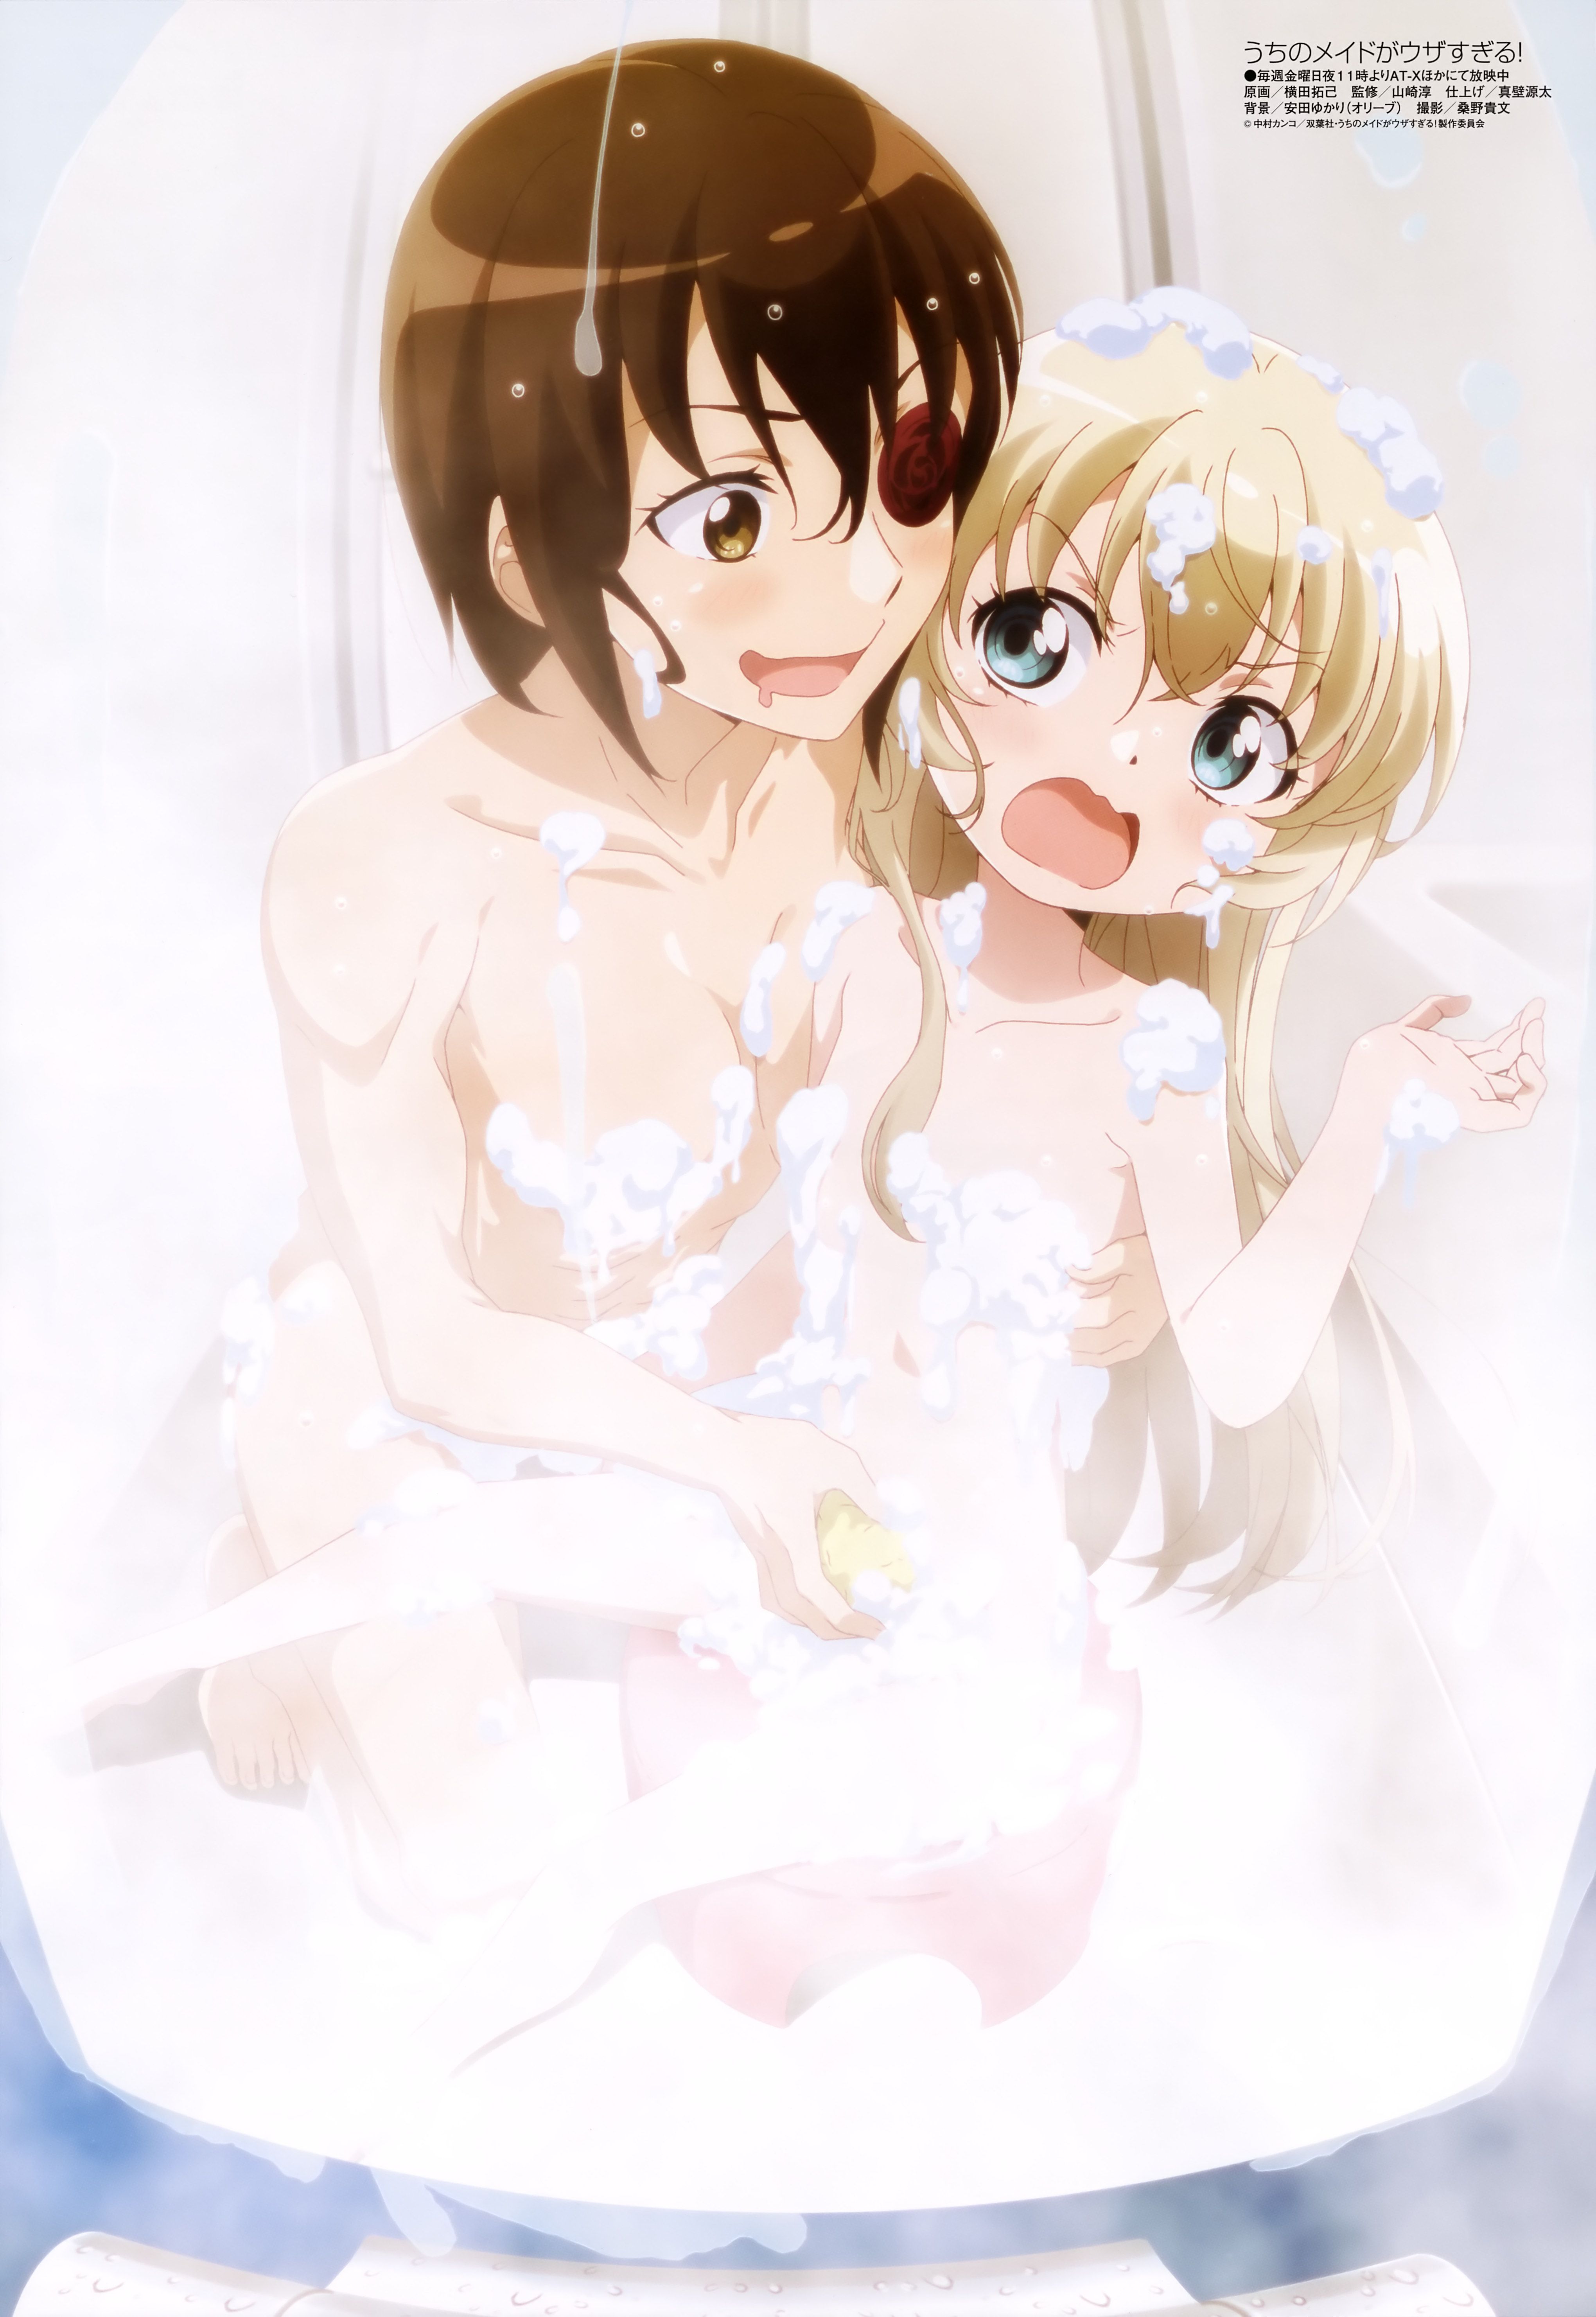 Erotic anime summary Erotic images of beautiful girls exposing the appearance without hail in the bath [50 sheets] 22